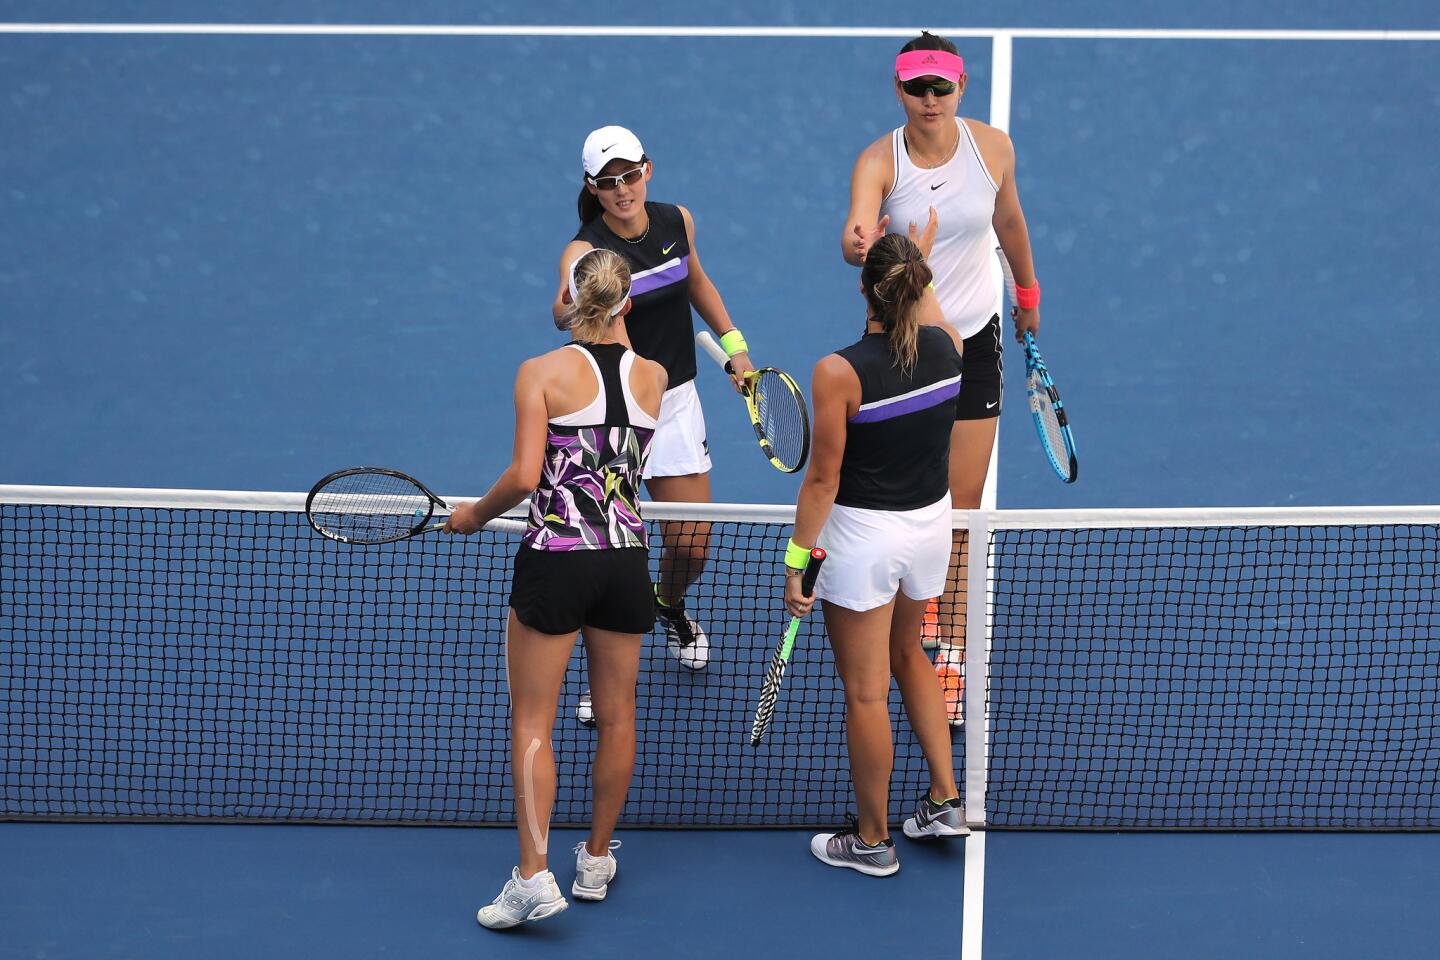 Elise Mertens of Belgium (R) and Aryna Sabalenka of Belarus shake hands after winning their Women's Doubles quarterfinal match against Saisai Zheng and Yingying Duan of China on day nine of the 2019 U.S. Open at the USTA Billie Jean King National Tennis Center on Sept. 3, 2019, in Queens.